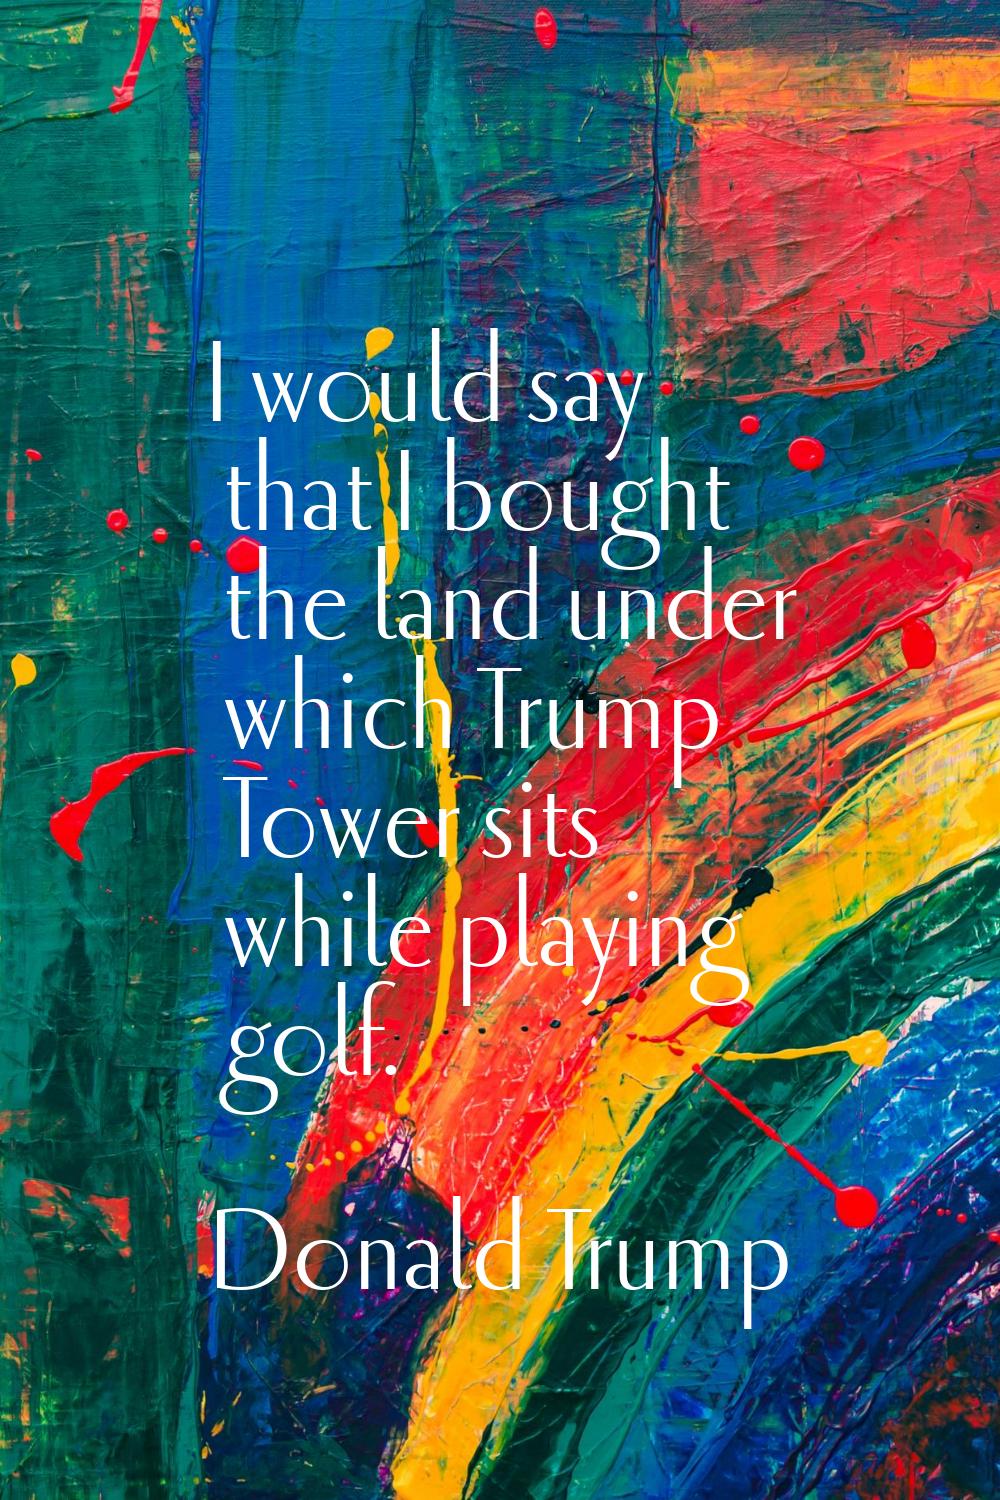 I would say that I bought the land under which Trump Tower sits while playing golf.